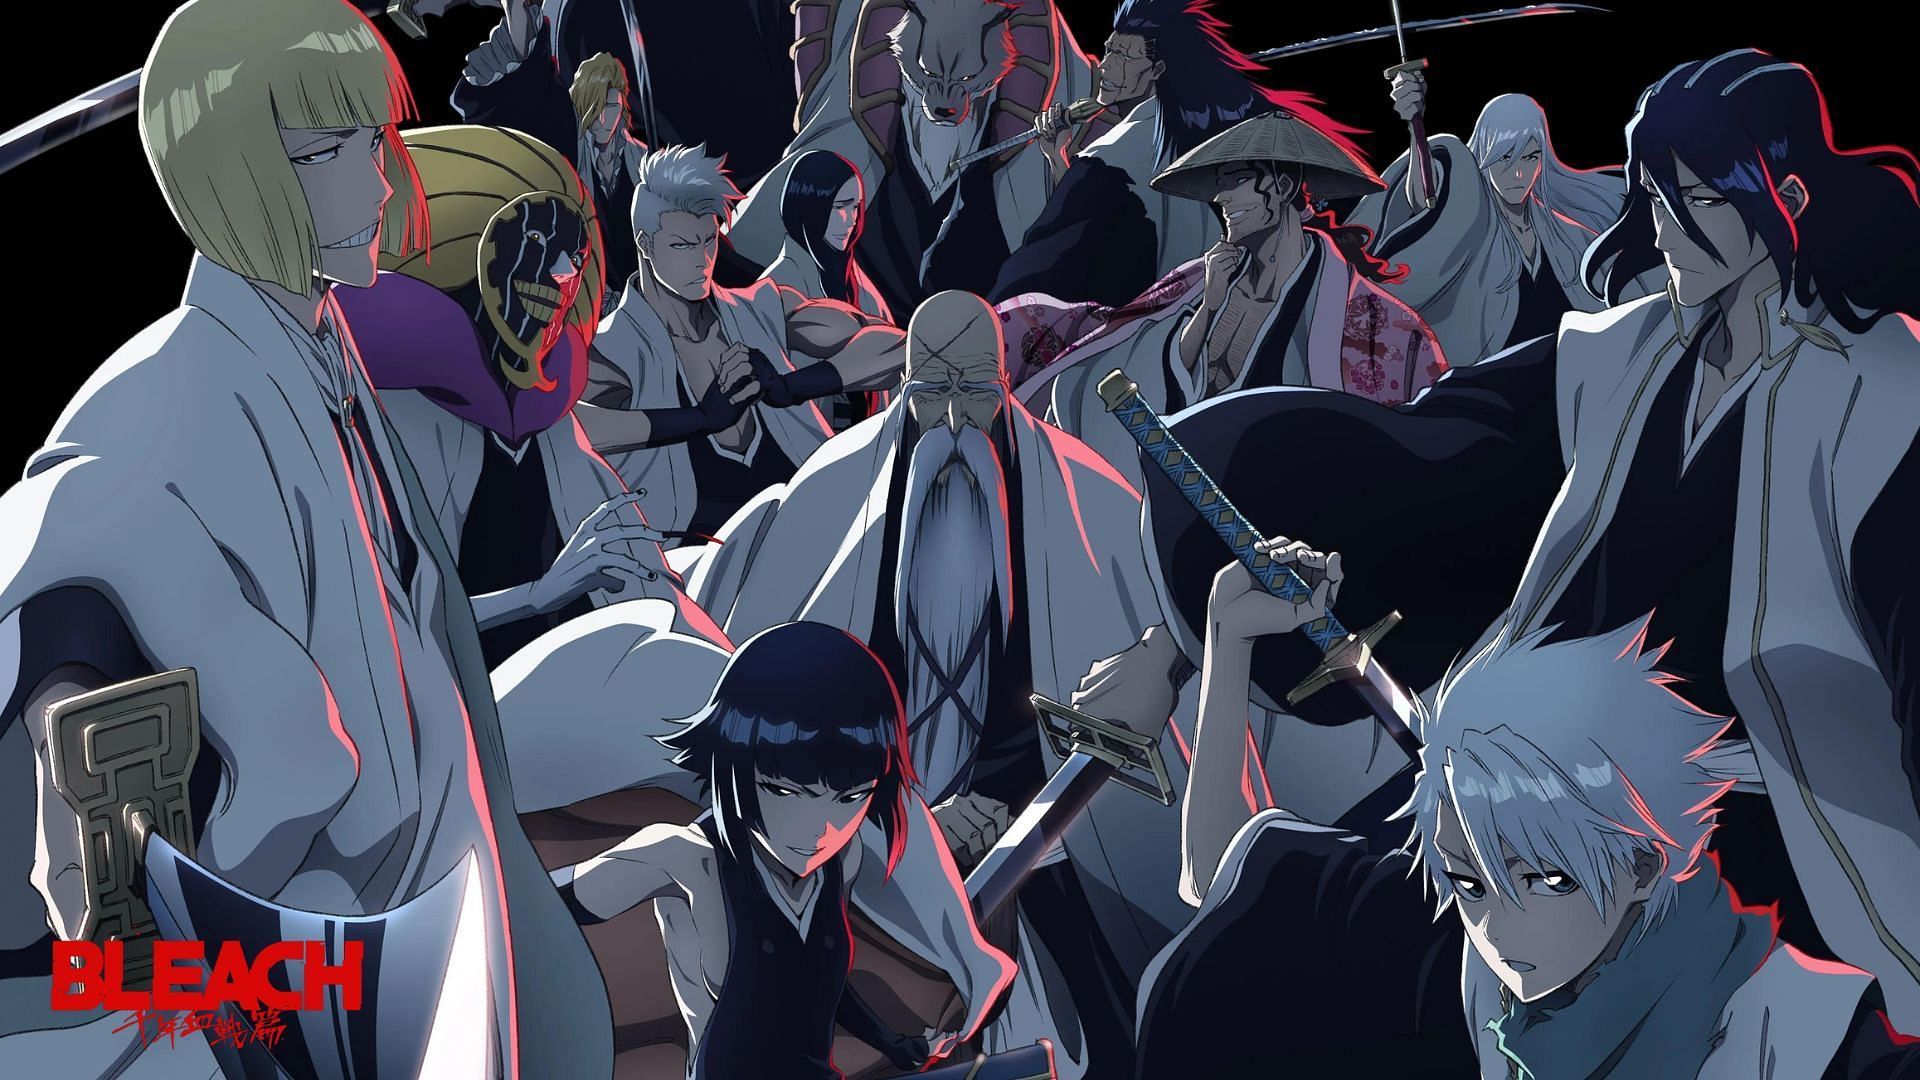 Bleach Creator Releases New Art of The First Soul Reapers